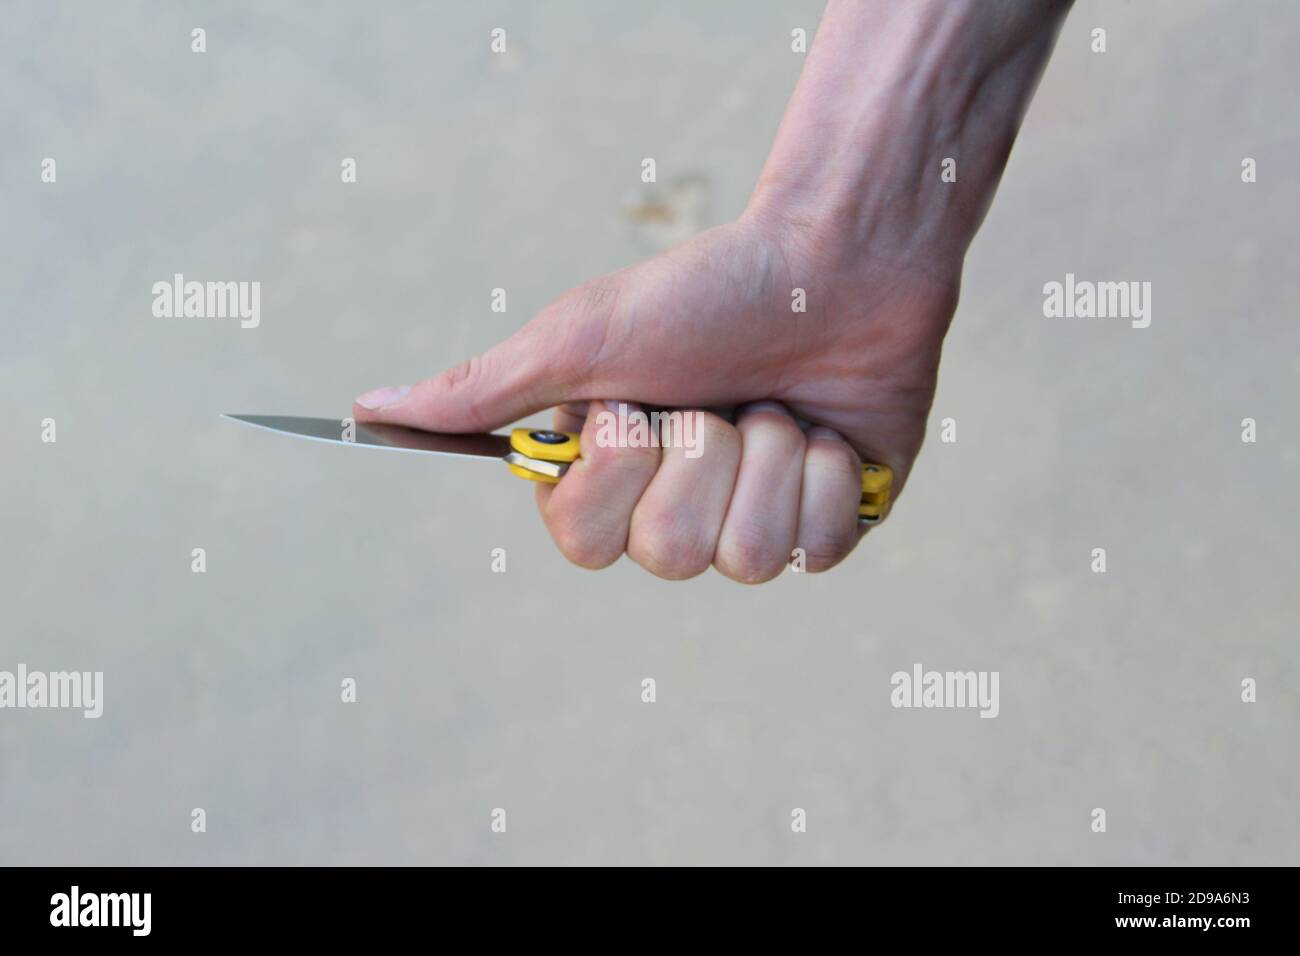 The man's hand holds a knife. Fingers compress a folding knife with a shiny close-up blade. The concept of crime, assault, weapons, security and attempted murder. Stock Photo